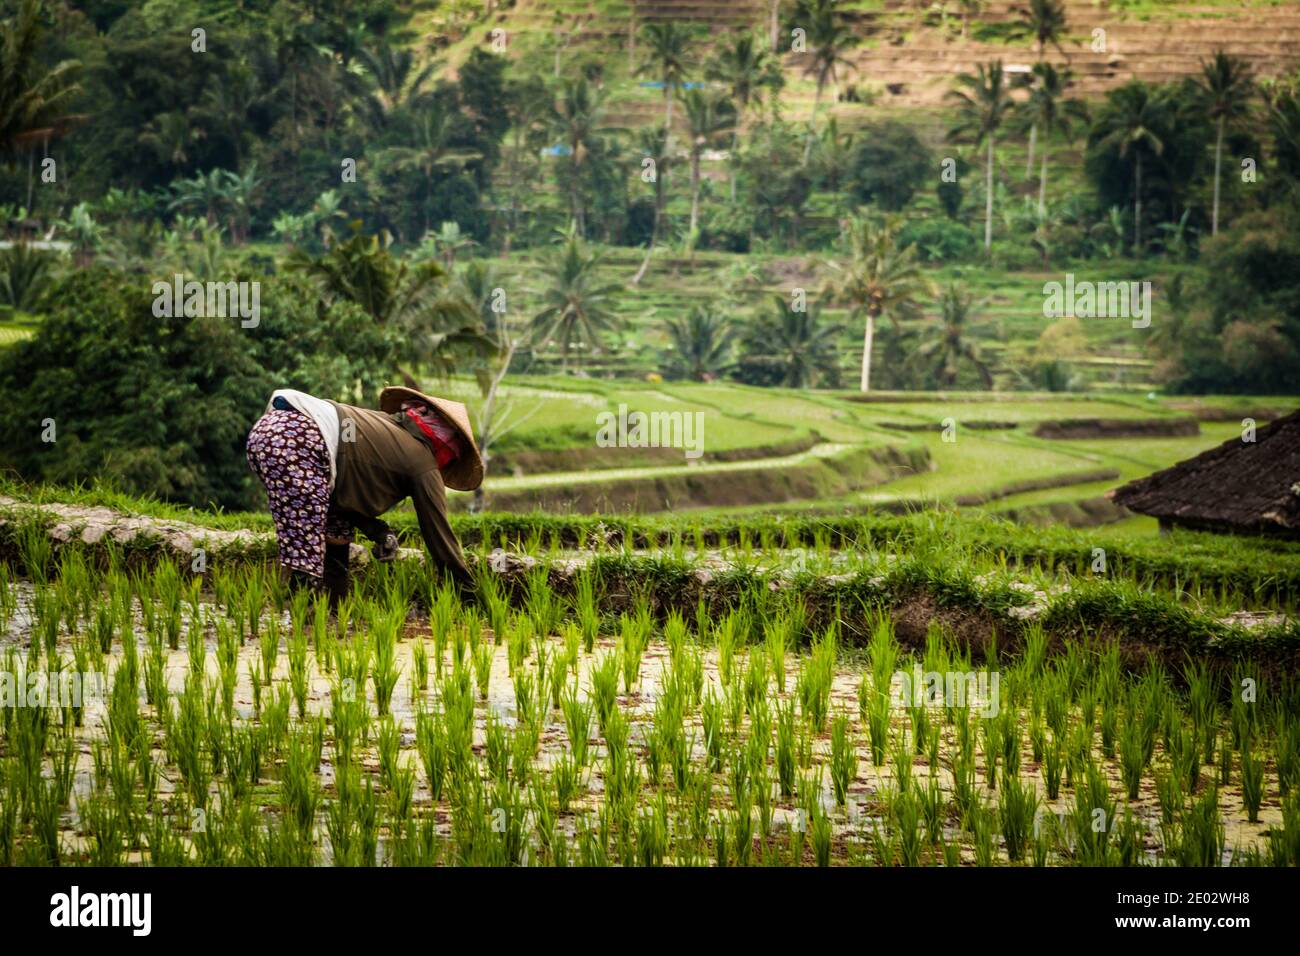 A rice worker in traditional clothes with straw hat working in rice fields at Jatiluwih Rice Terrace Stock Photo